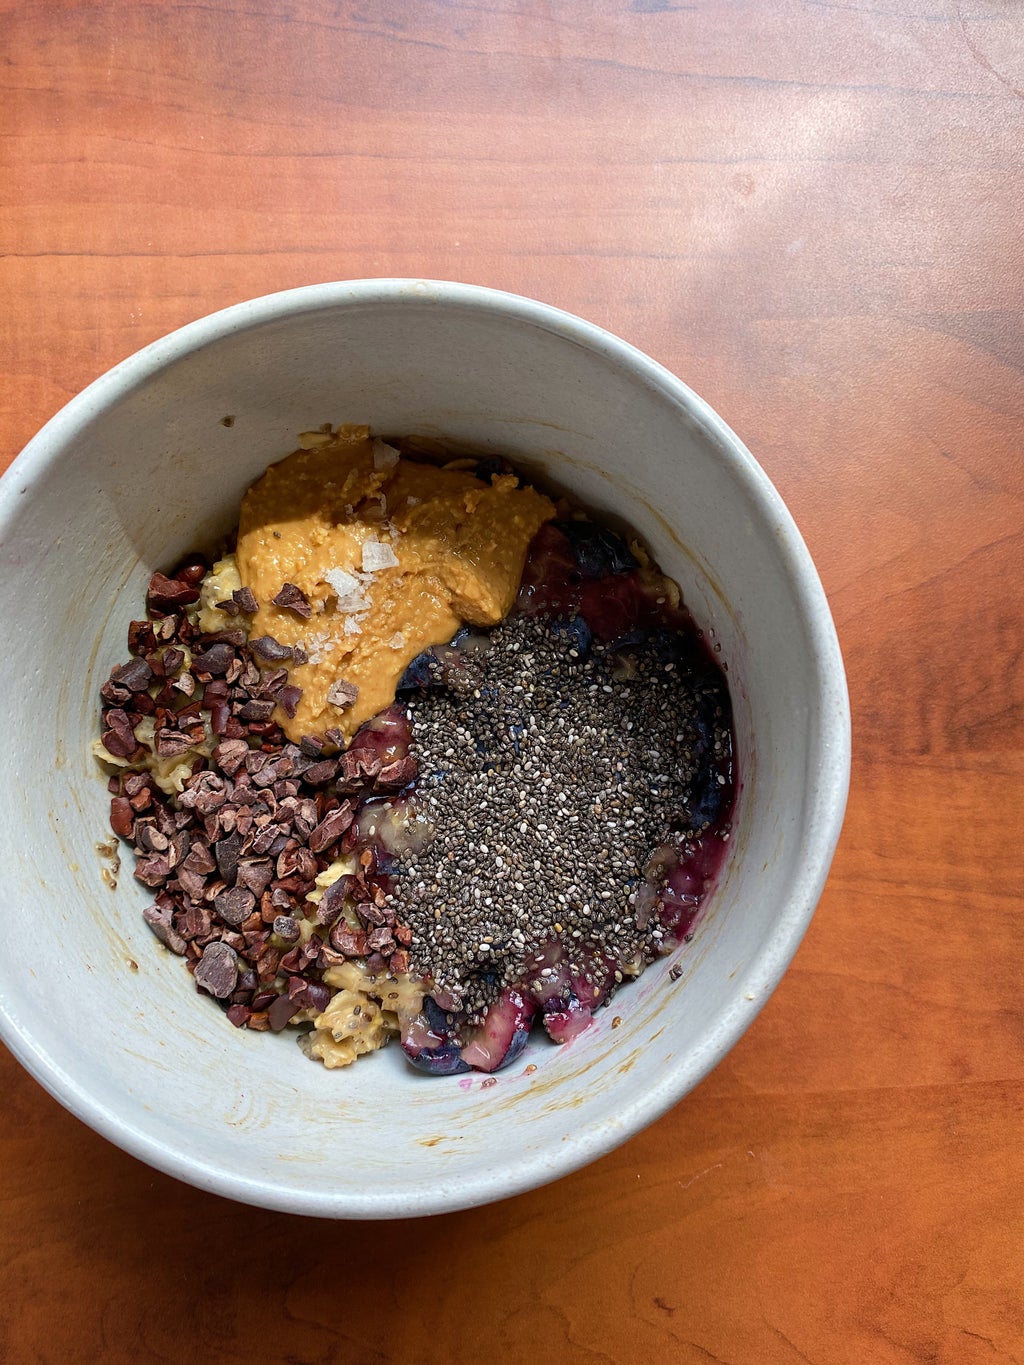 SImple dorm oatmeal with nut butter, chia seeds, and chocolate pieces